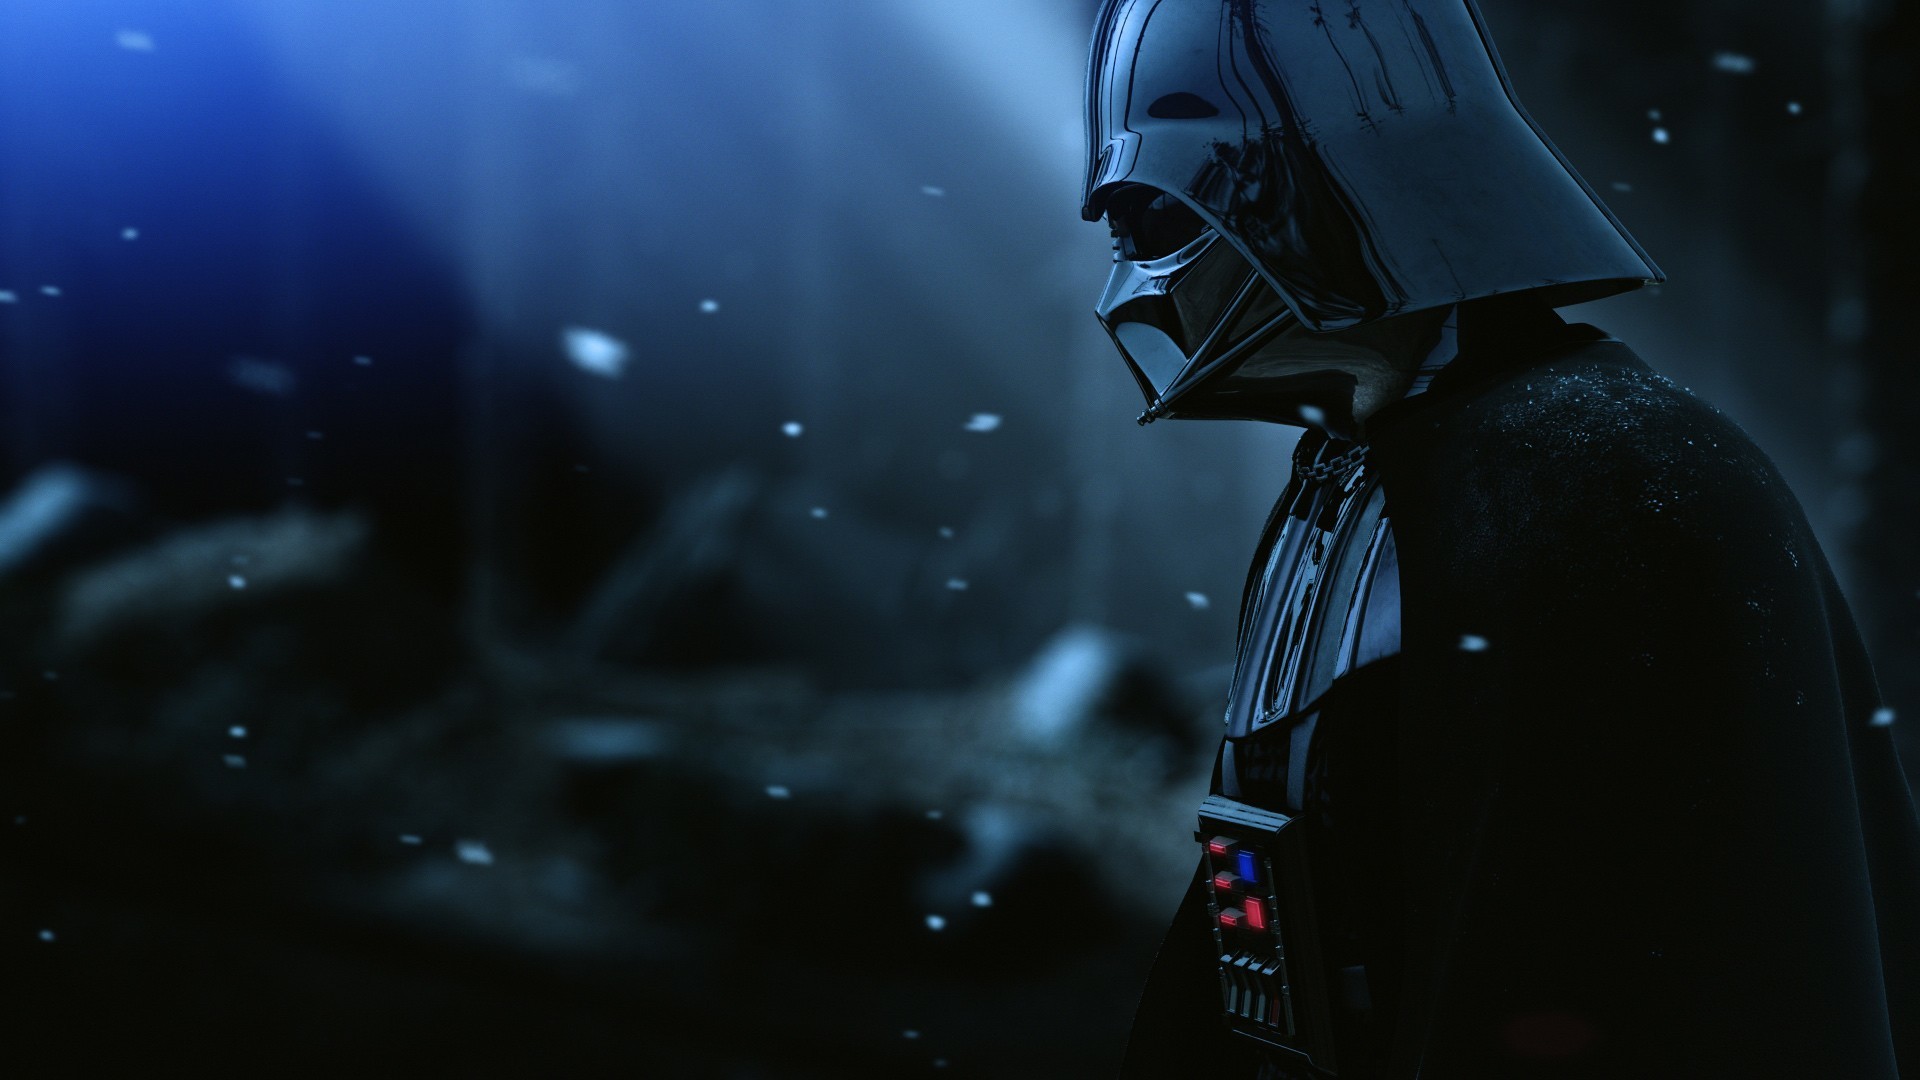 1920x1080 Darth Vader Star Wars Snow Game Background hd wallpaper by chococruise